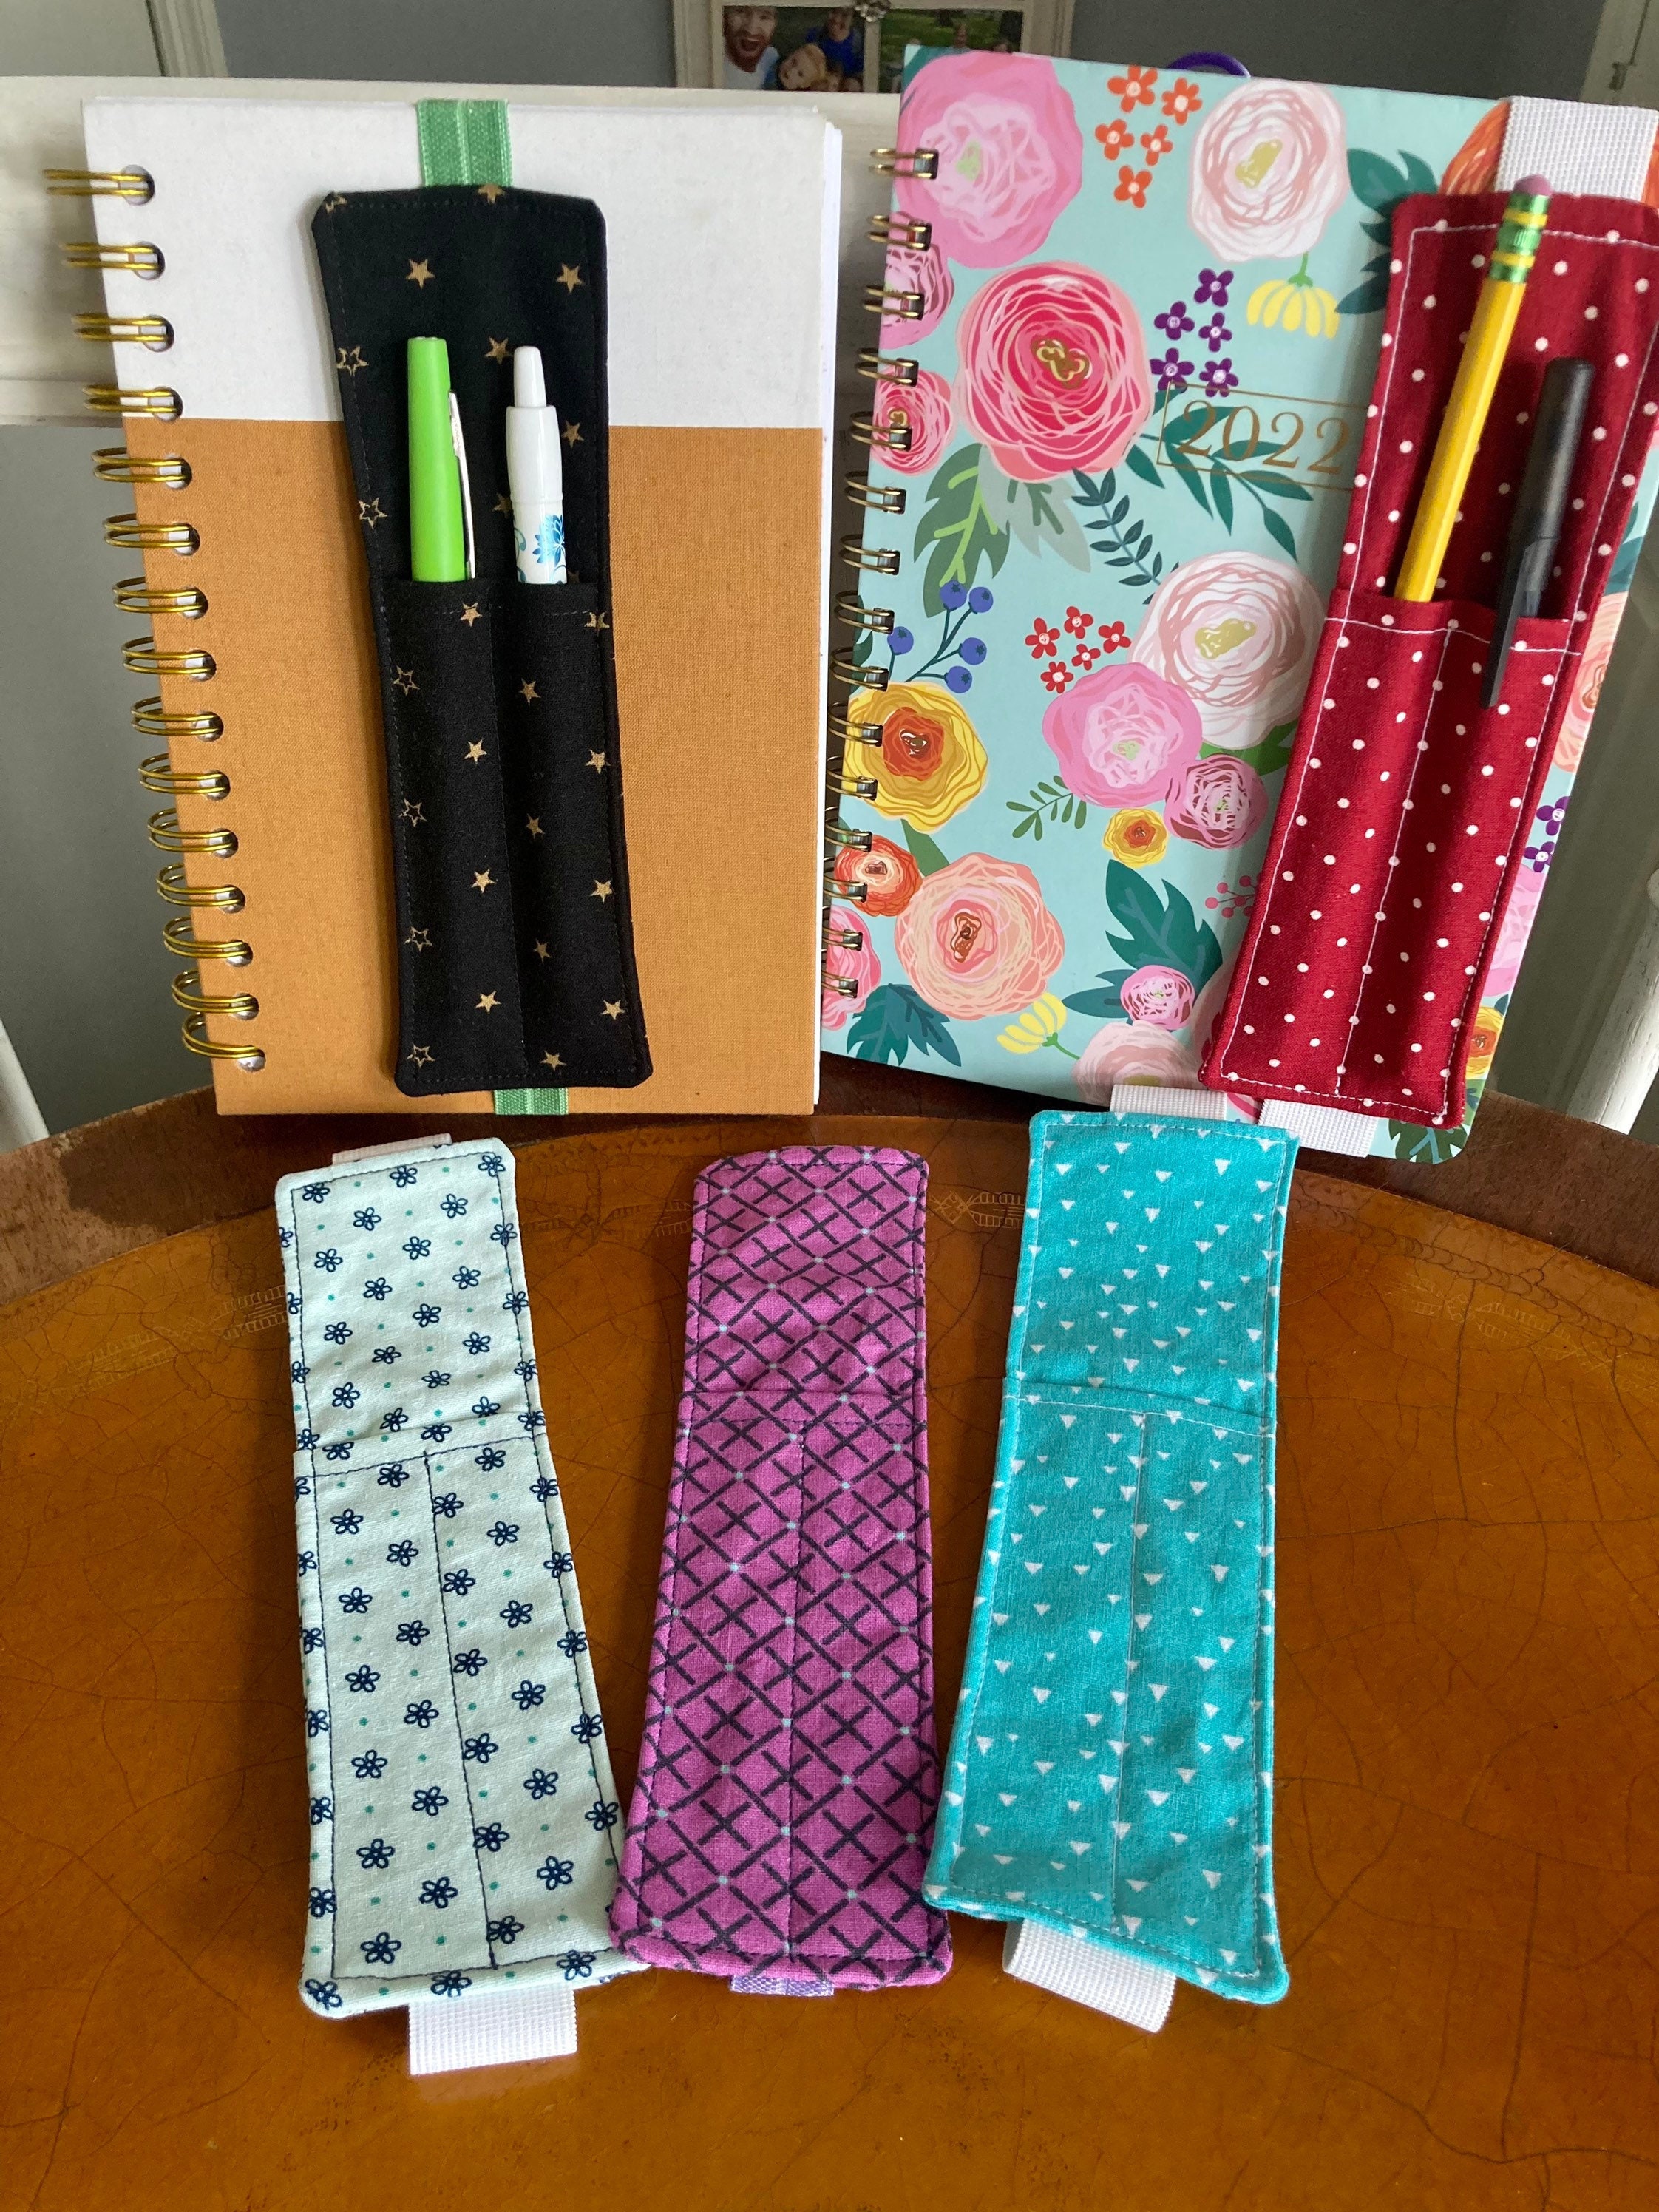 Pencil Holder Bookmark DIY - 5 out of 4 Patterns